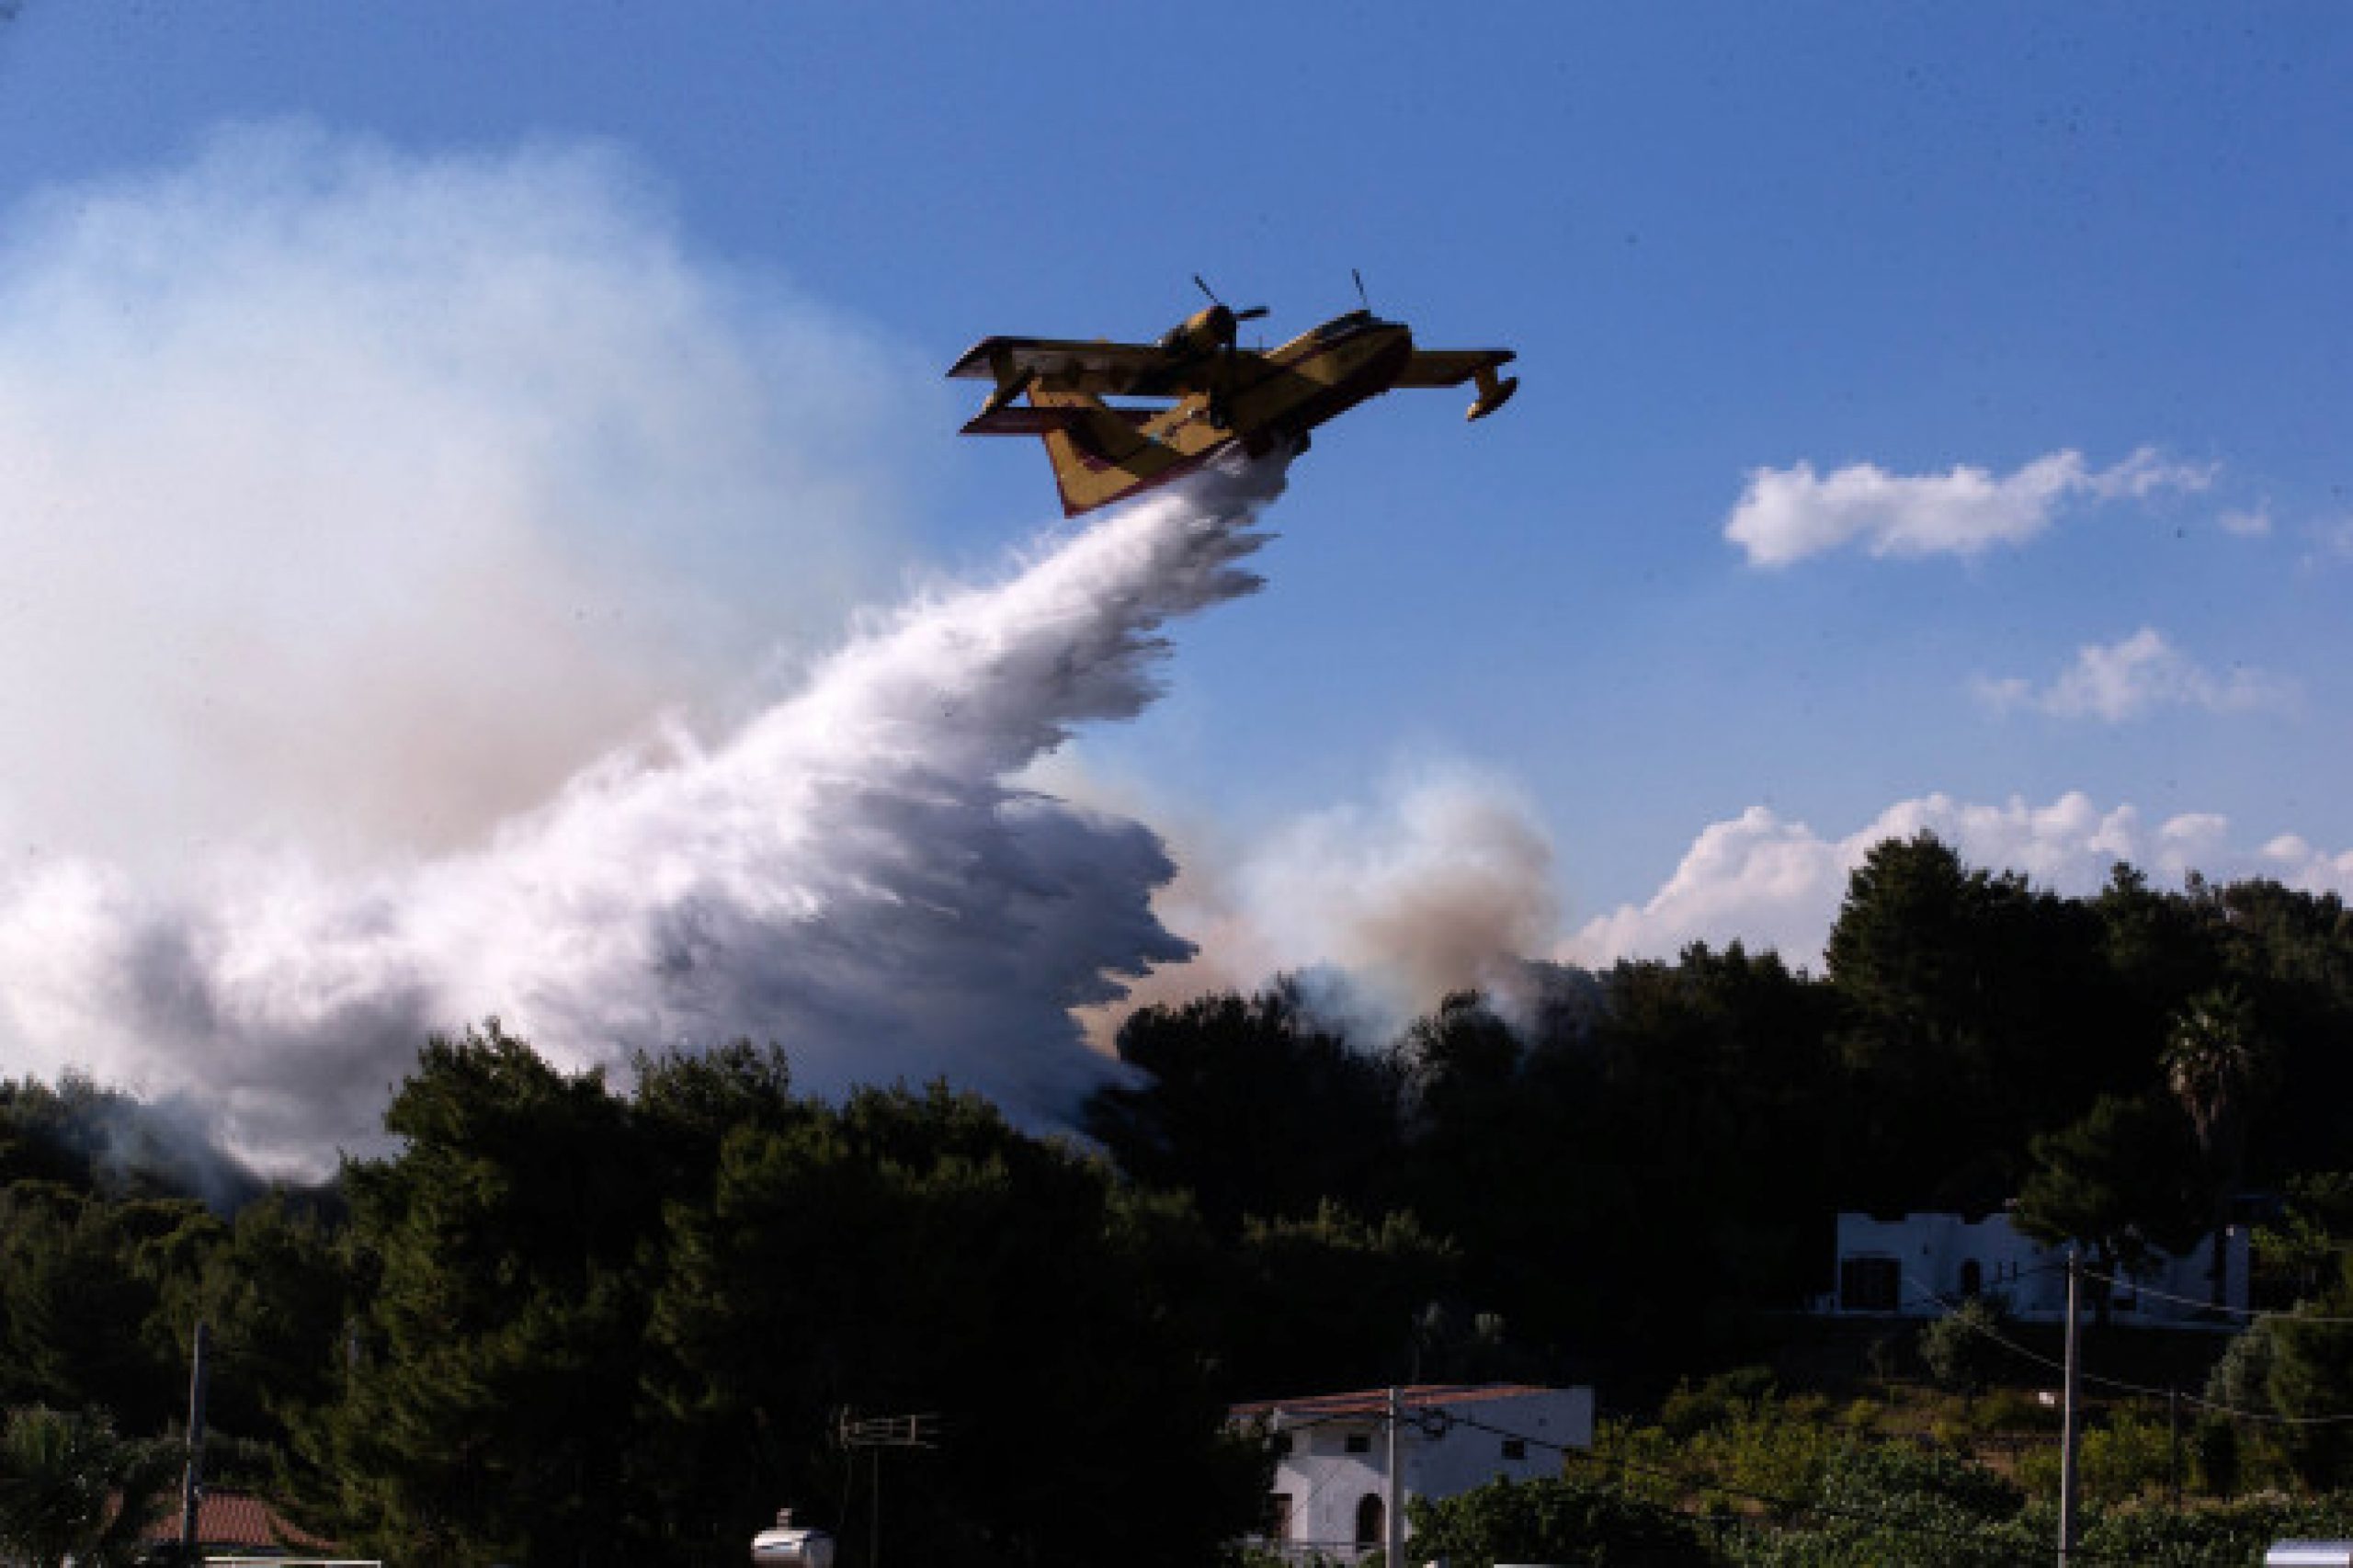 ‘Ecological disaster’ feared as Greece battles massive forest fire